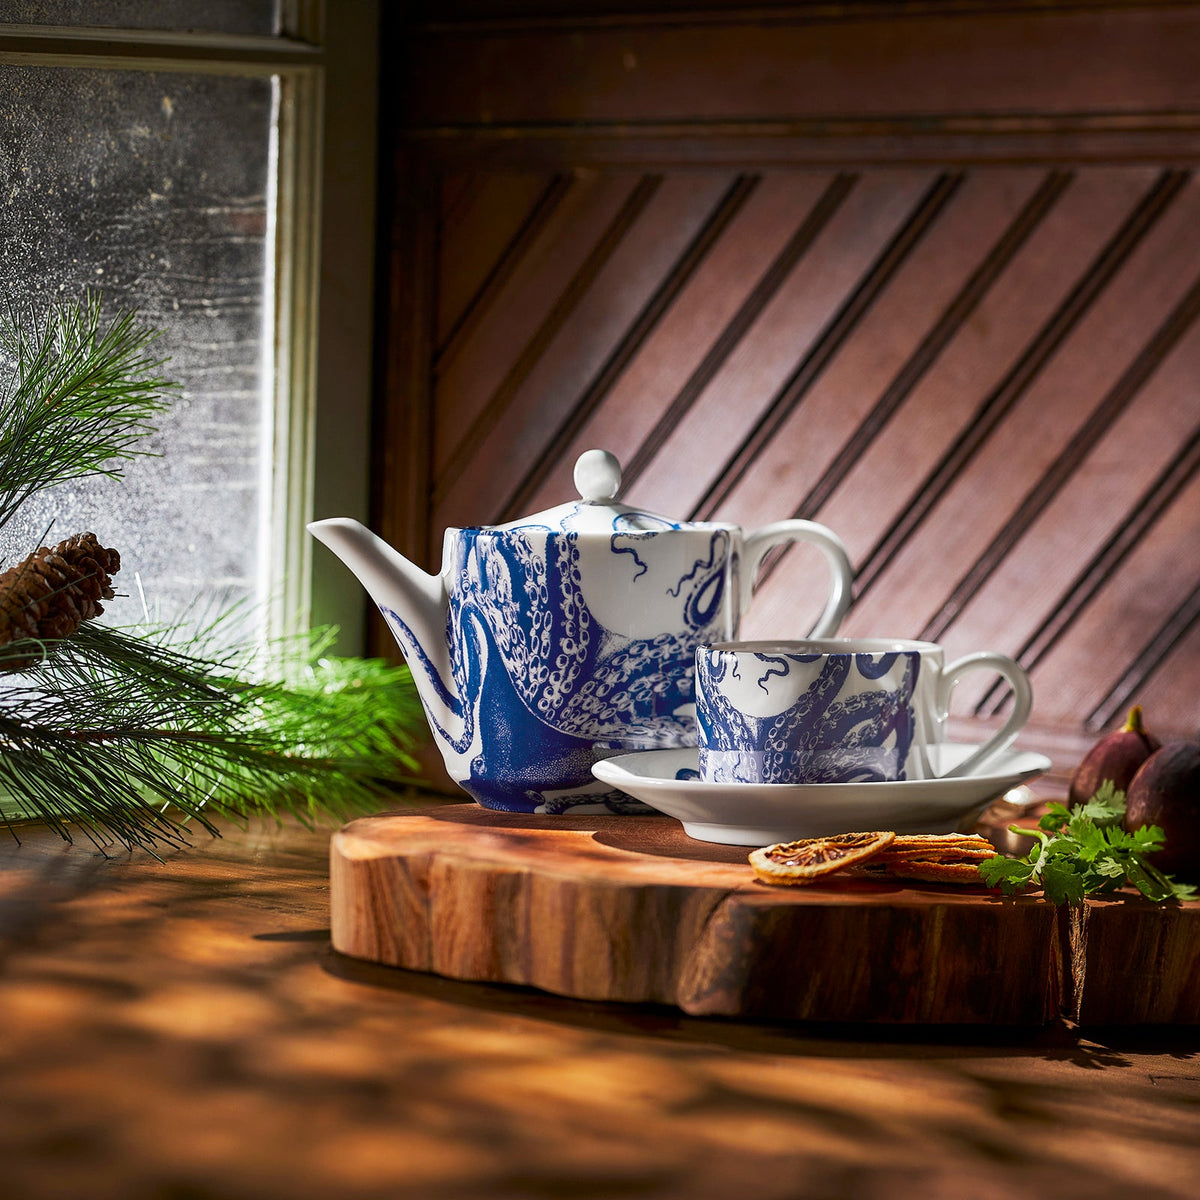 Blue and white teapot made of bone china with matching Lucy Cups &amp; Saucers, Set of 2 by Caskata on a wooden tray, placed near a window with sunlight streaming in and greenery in the foreground.